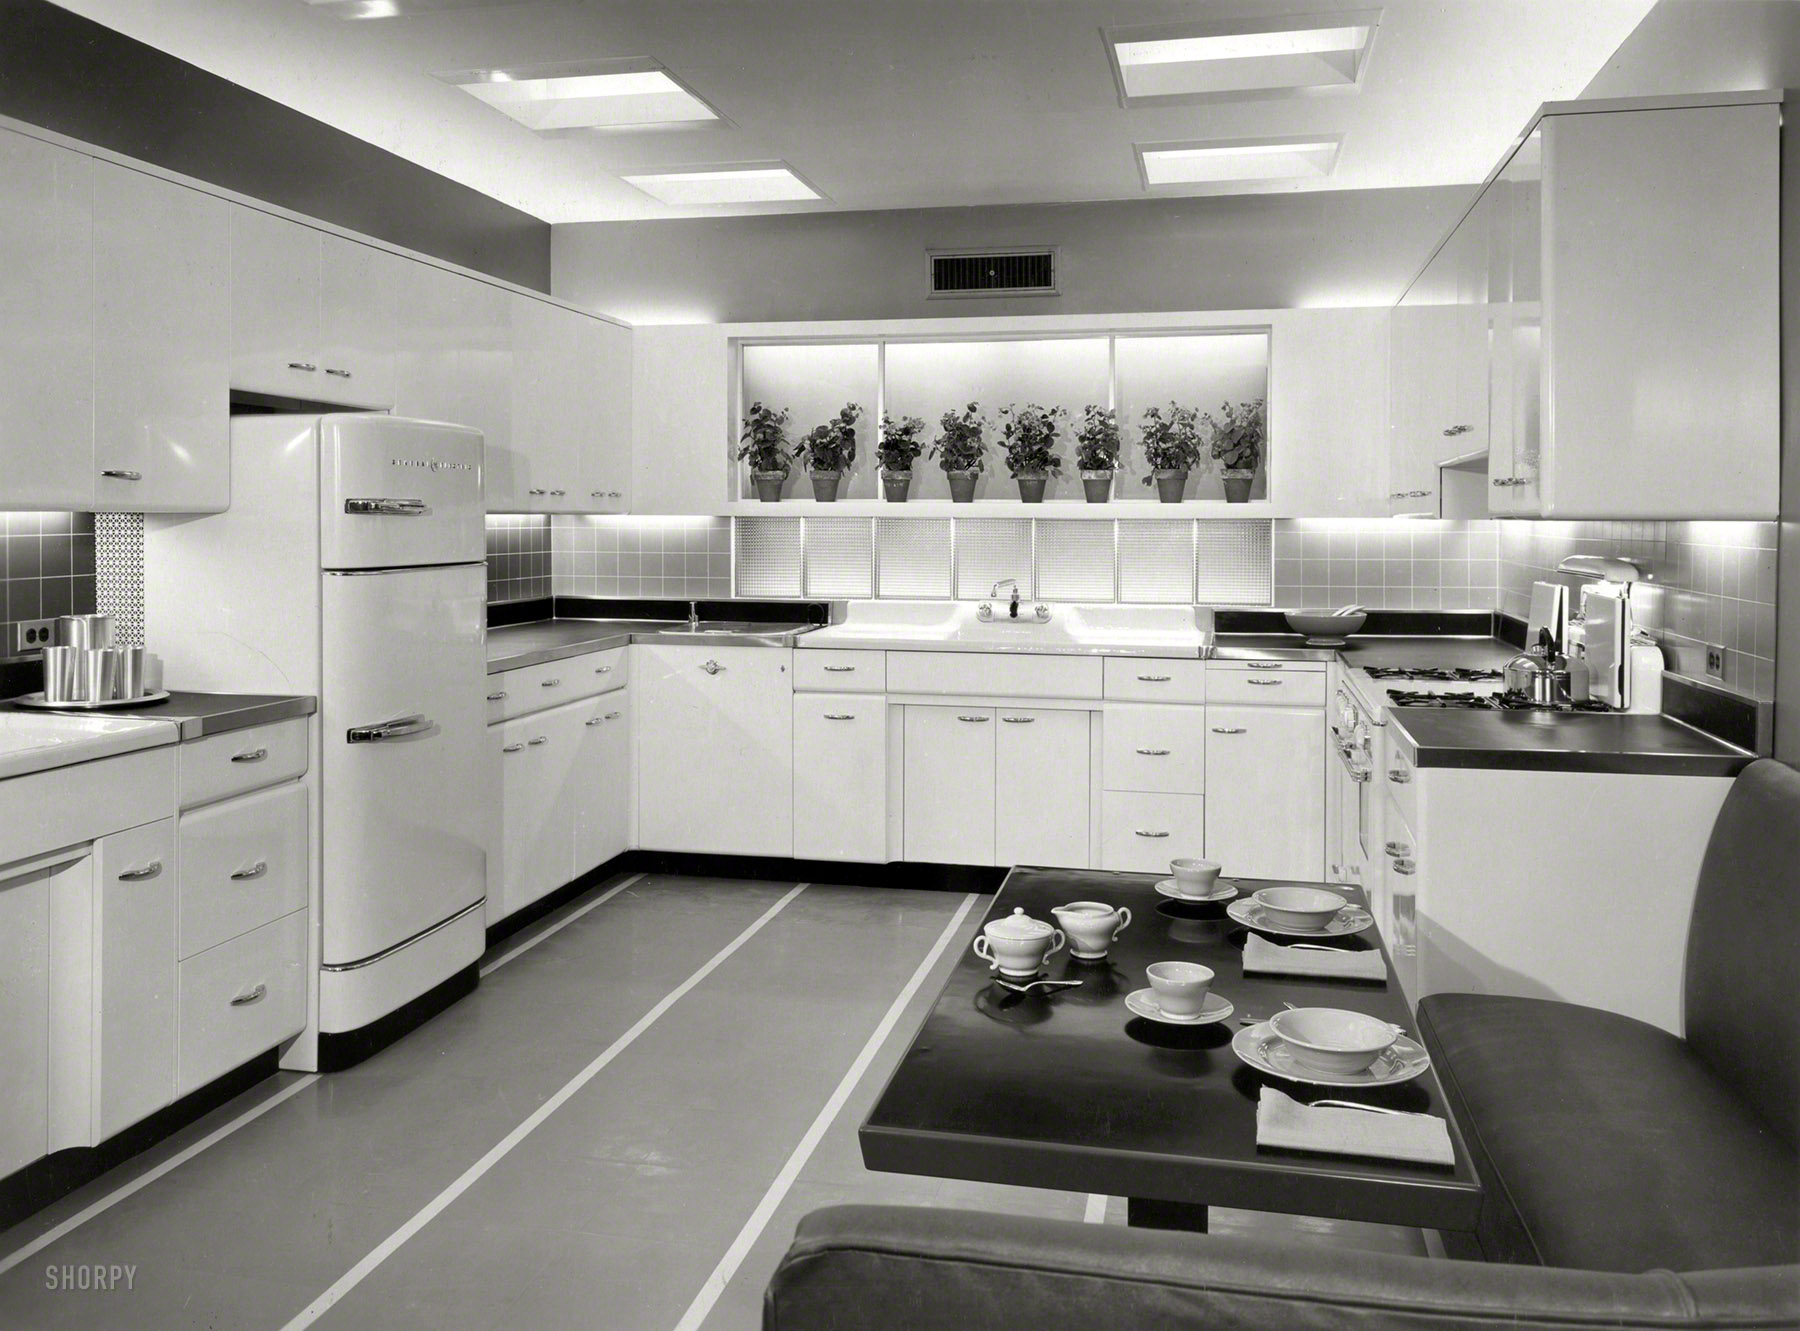 May 3, 1955. "Model kitchen in Chicago showroom. Advertisement for Crane fixtures." Presenting, if not the Kitchen of Tomorrow, at least the Breakfast Nook of Next Wednesday. Photo by Bill Hedrich, Hedrich-Blessing Studio. New York World-Telegram and Sun Newspaper Photograph Collection. View full size.